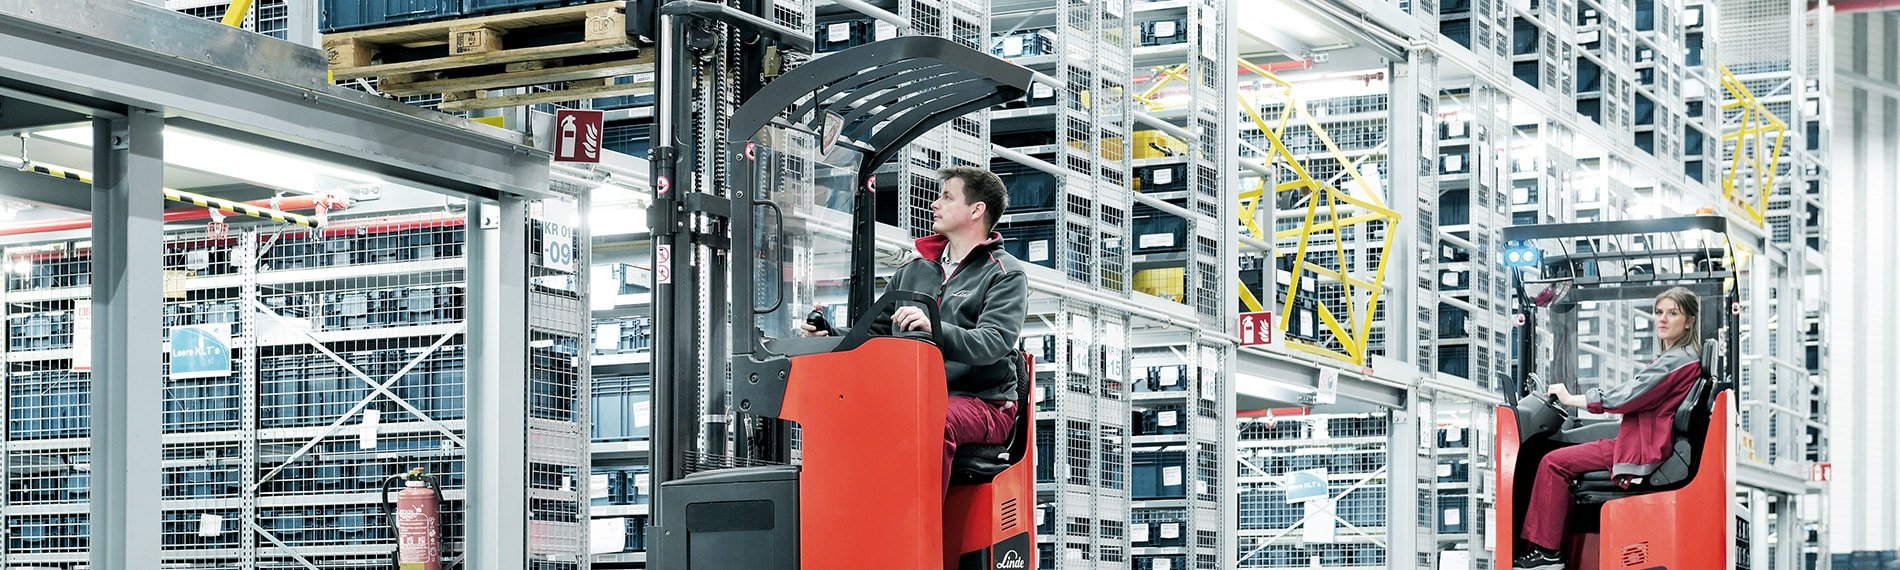 Transporting goods in the warehouse with reach trucks from Linde